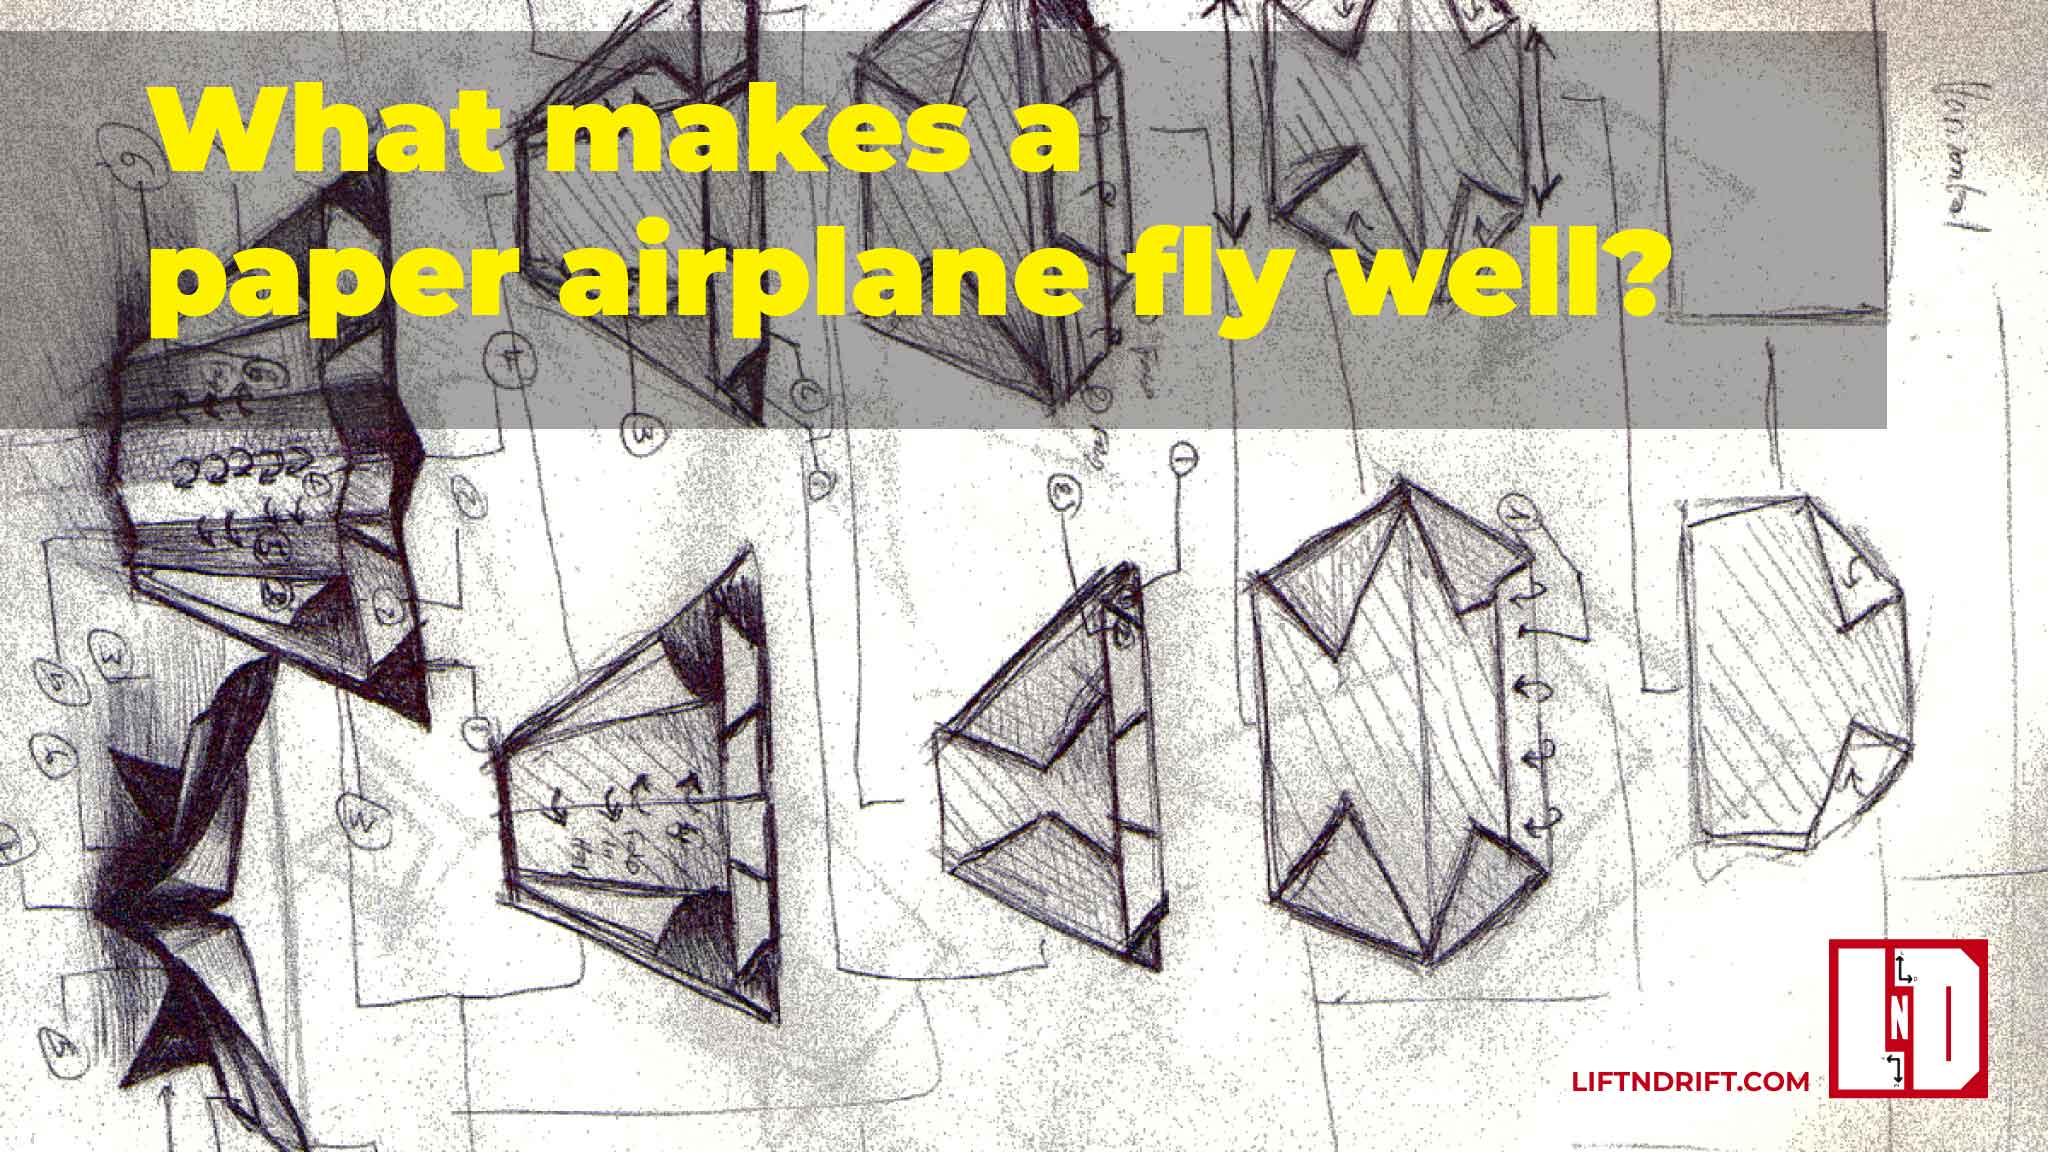 What makes a paper airplane fly well